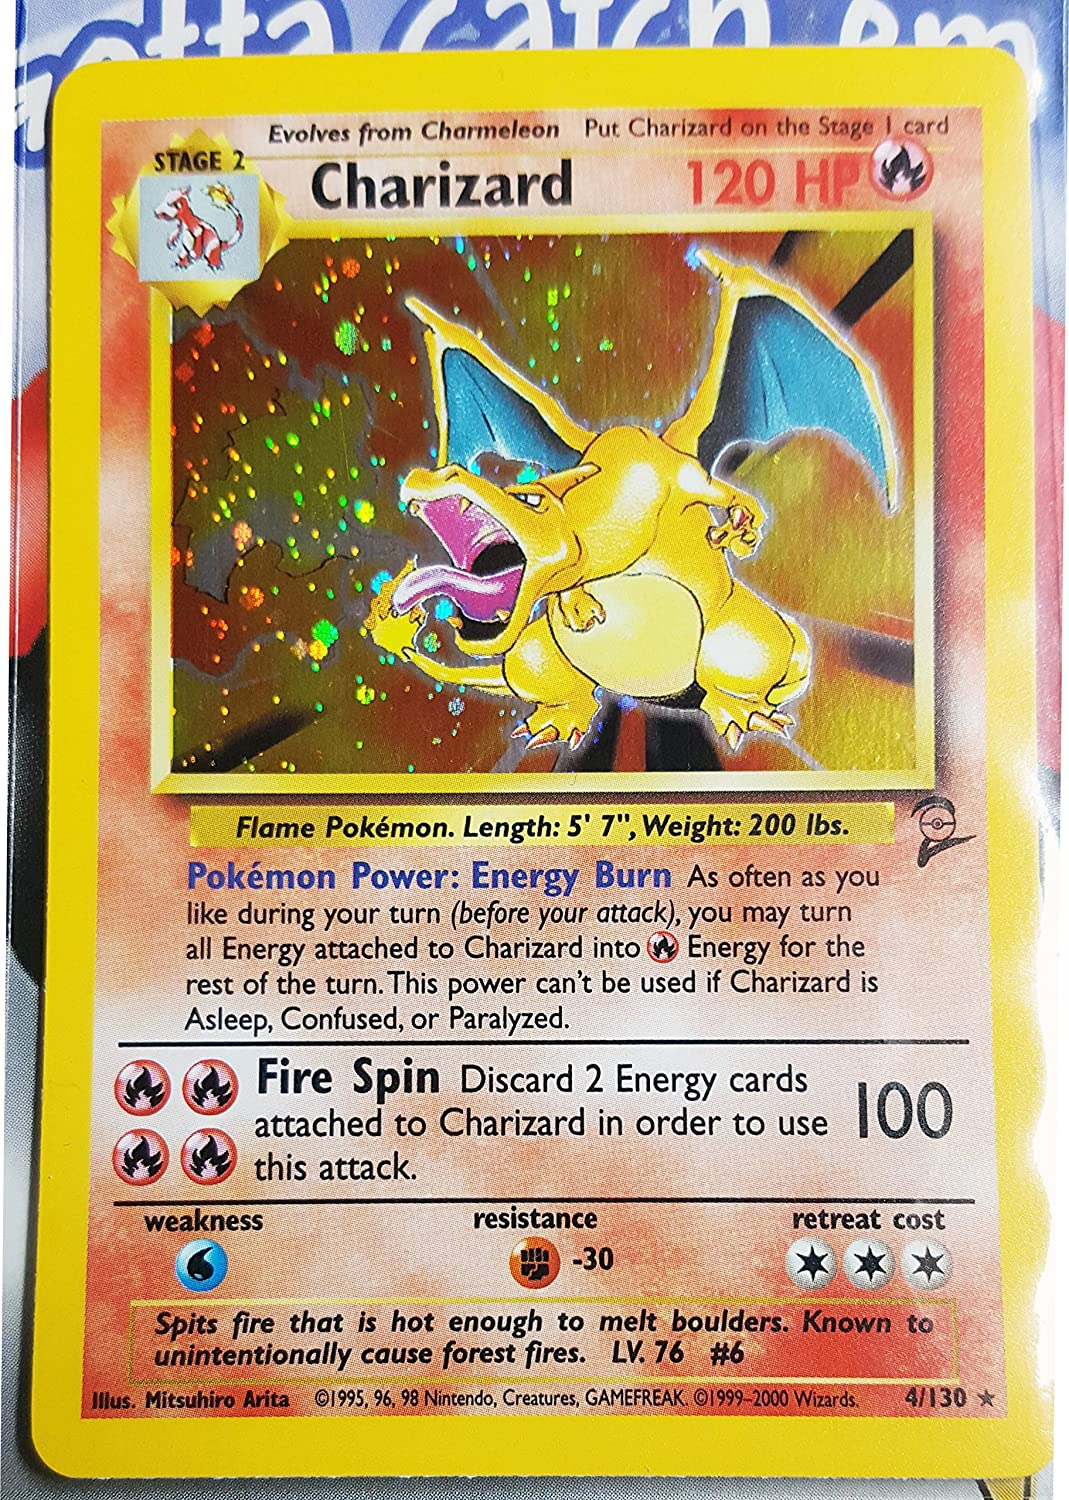 First Edition Pokémon Card Sells For A Huge Sum On EBay